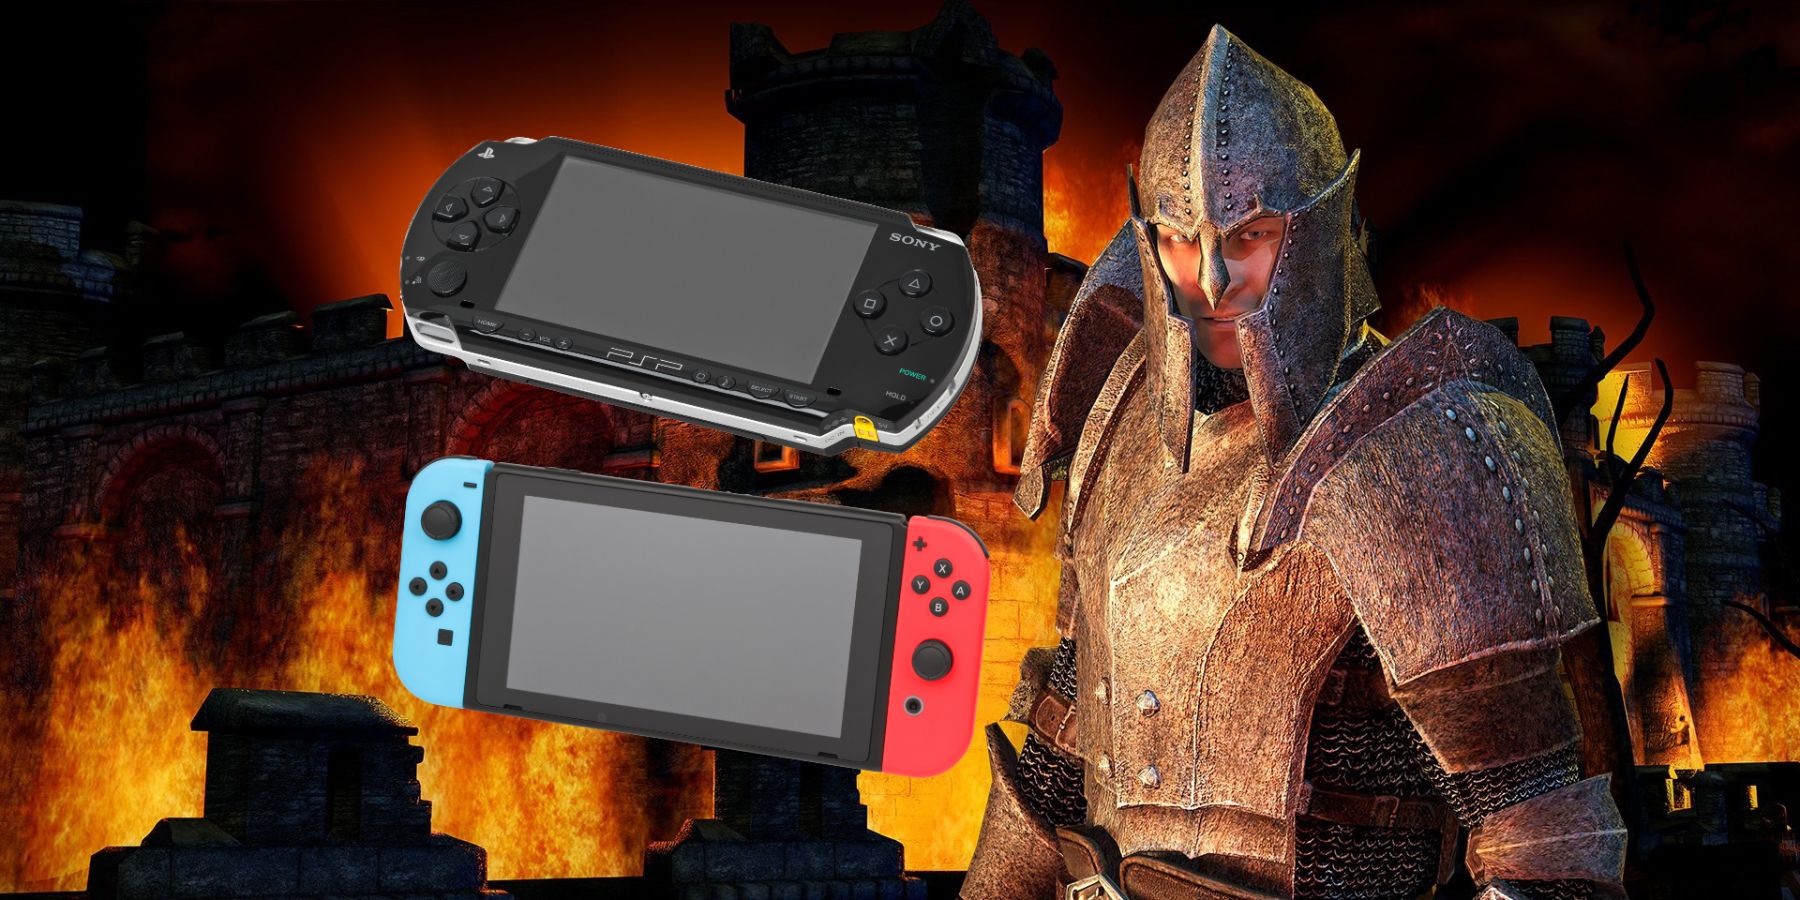 Elder Scrolls: Oblivion Almost Came To PSP (But Still Isn't On Switch)